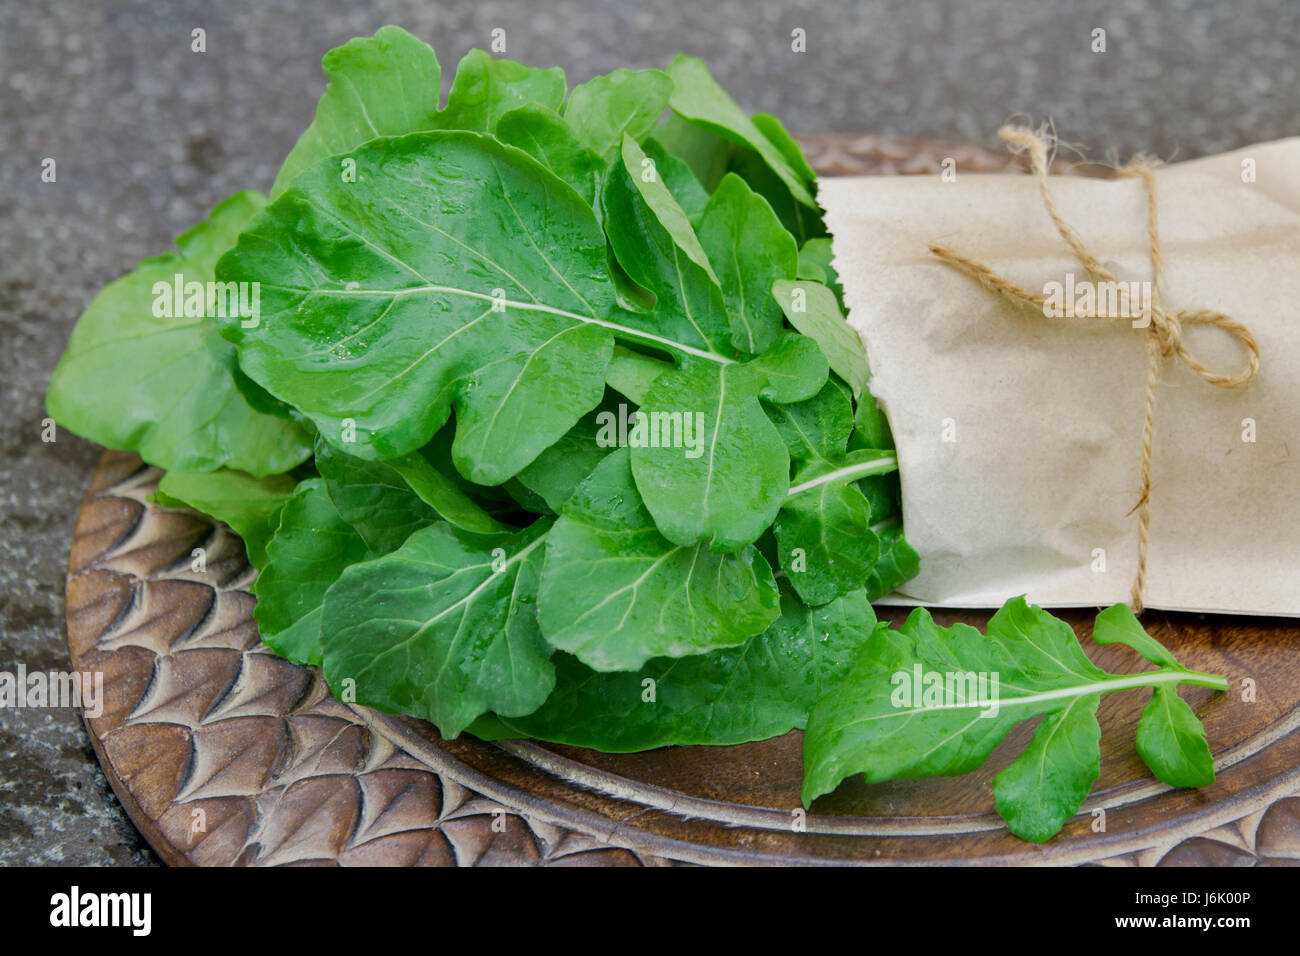 Bunche of fresh arugula, fresh rucola rocket salad leaves in a paper bag on a granite table. Stock Photo